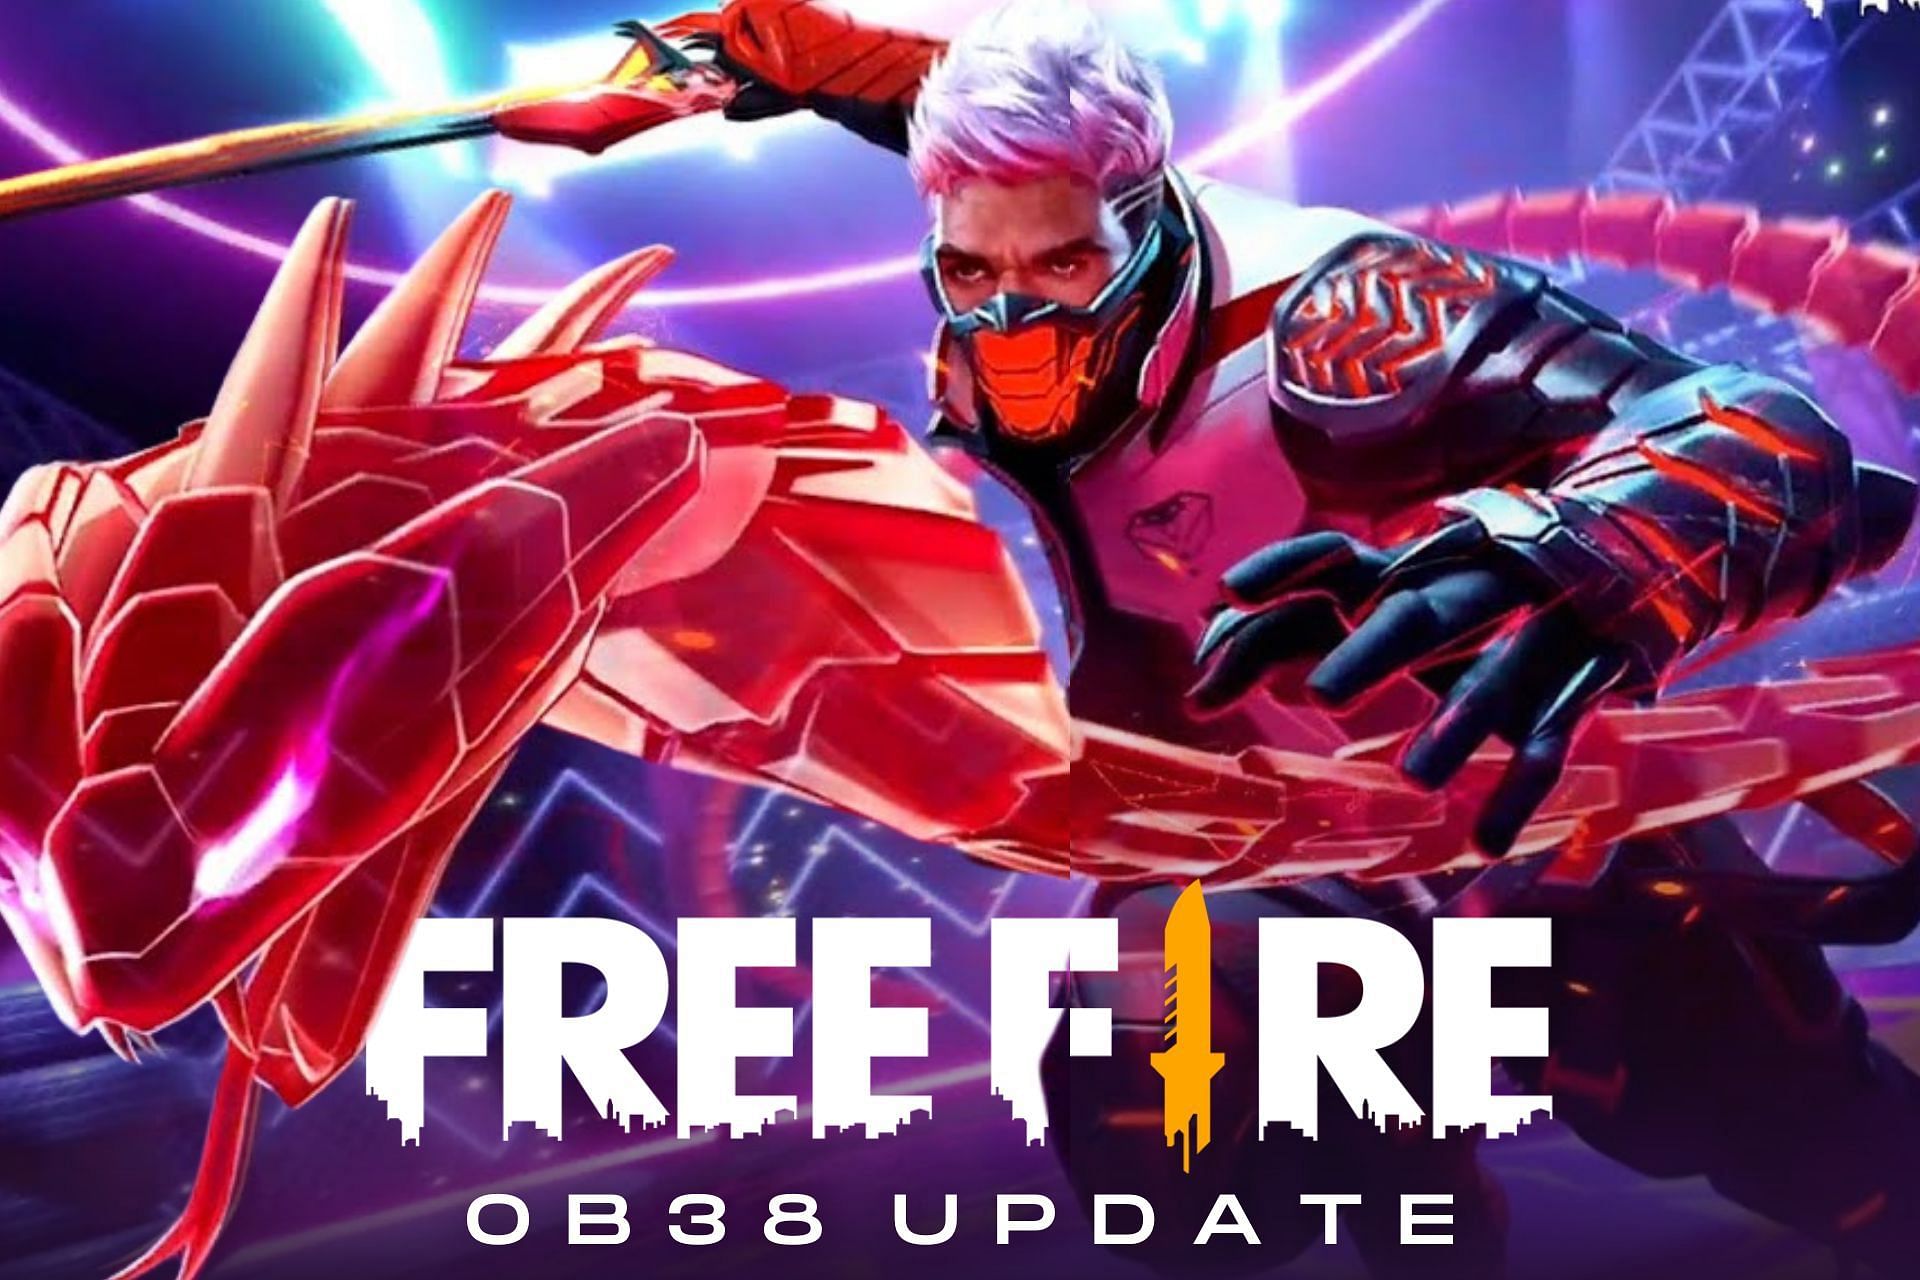 How to update Free Fire MAX OB38 version today: Android and iOS guide